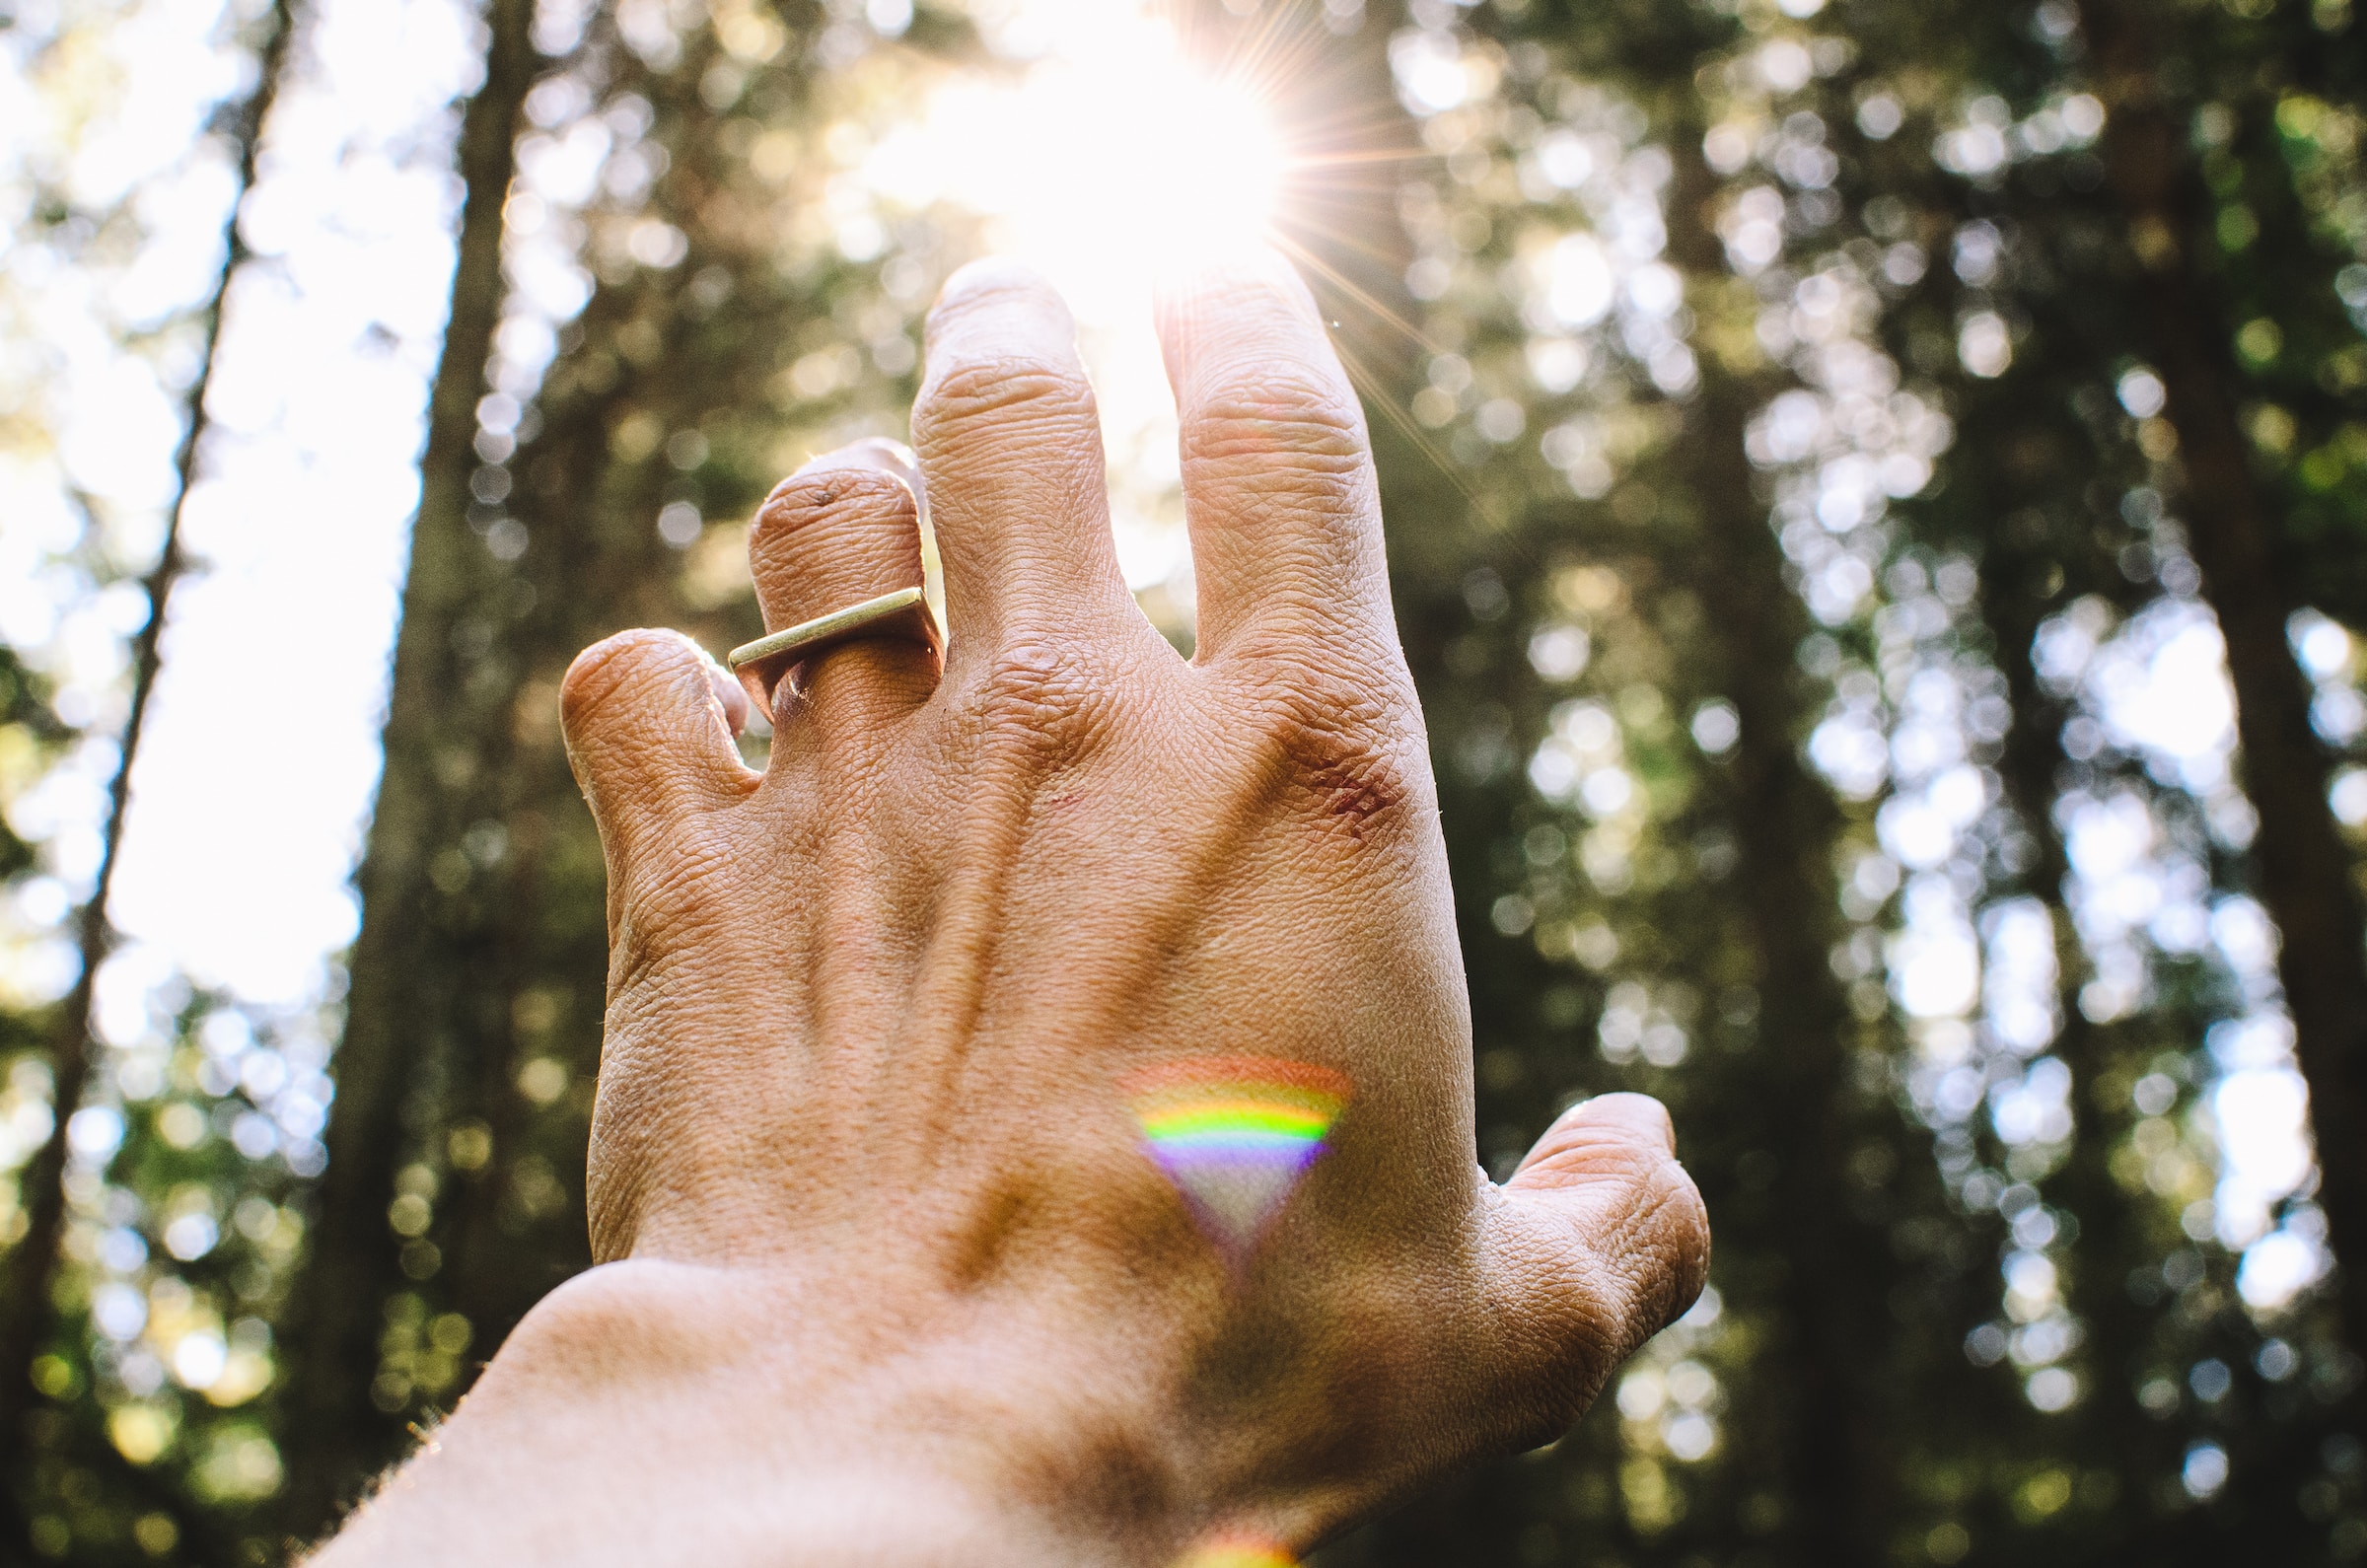 A hand reaching towards sunlight in a forest